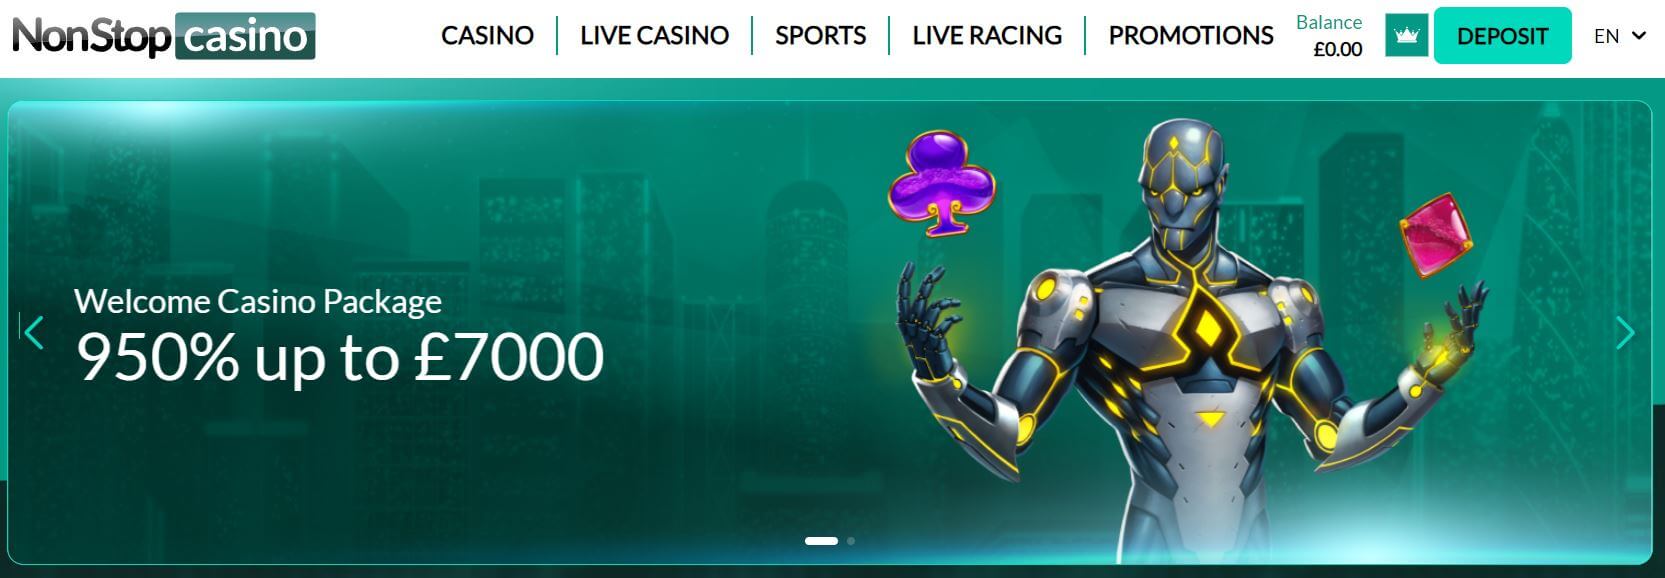 Non Stop Casino welcome offer